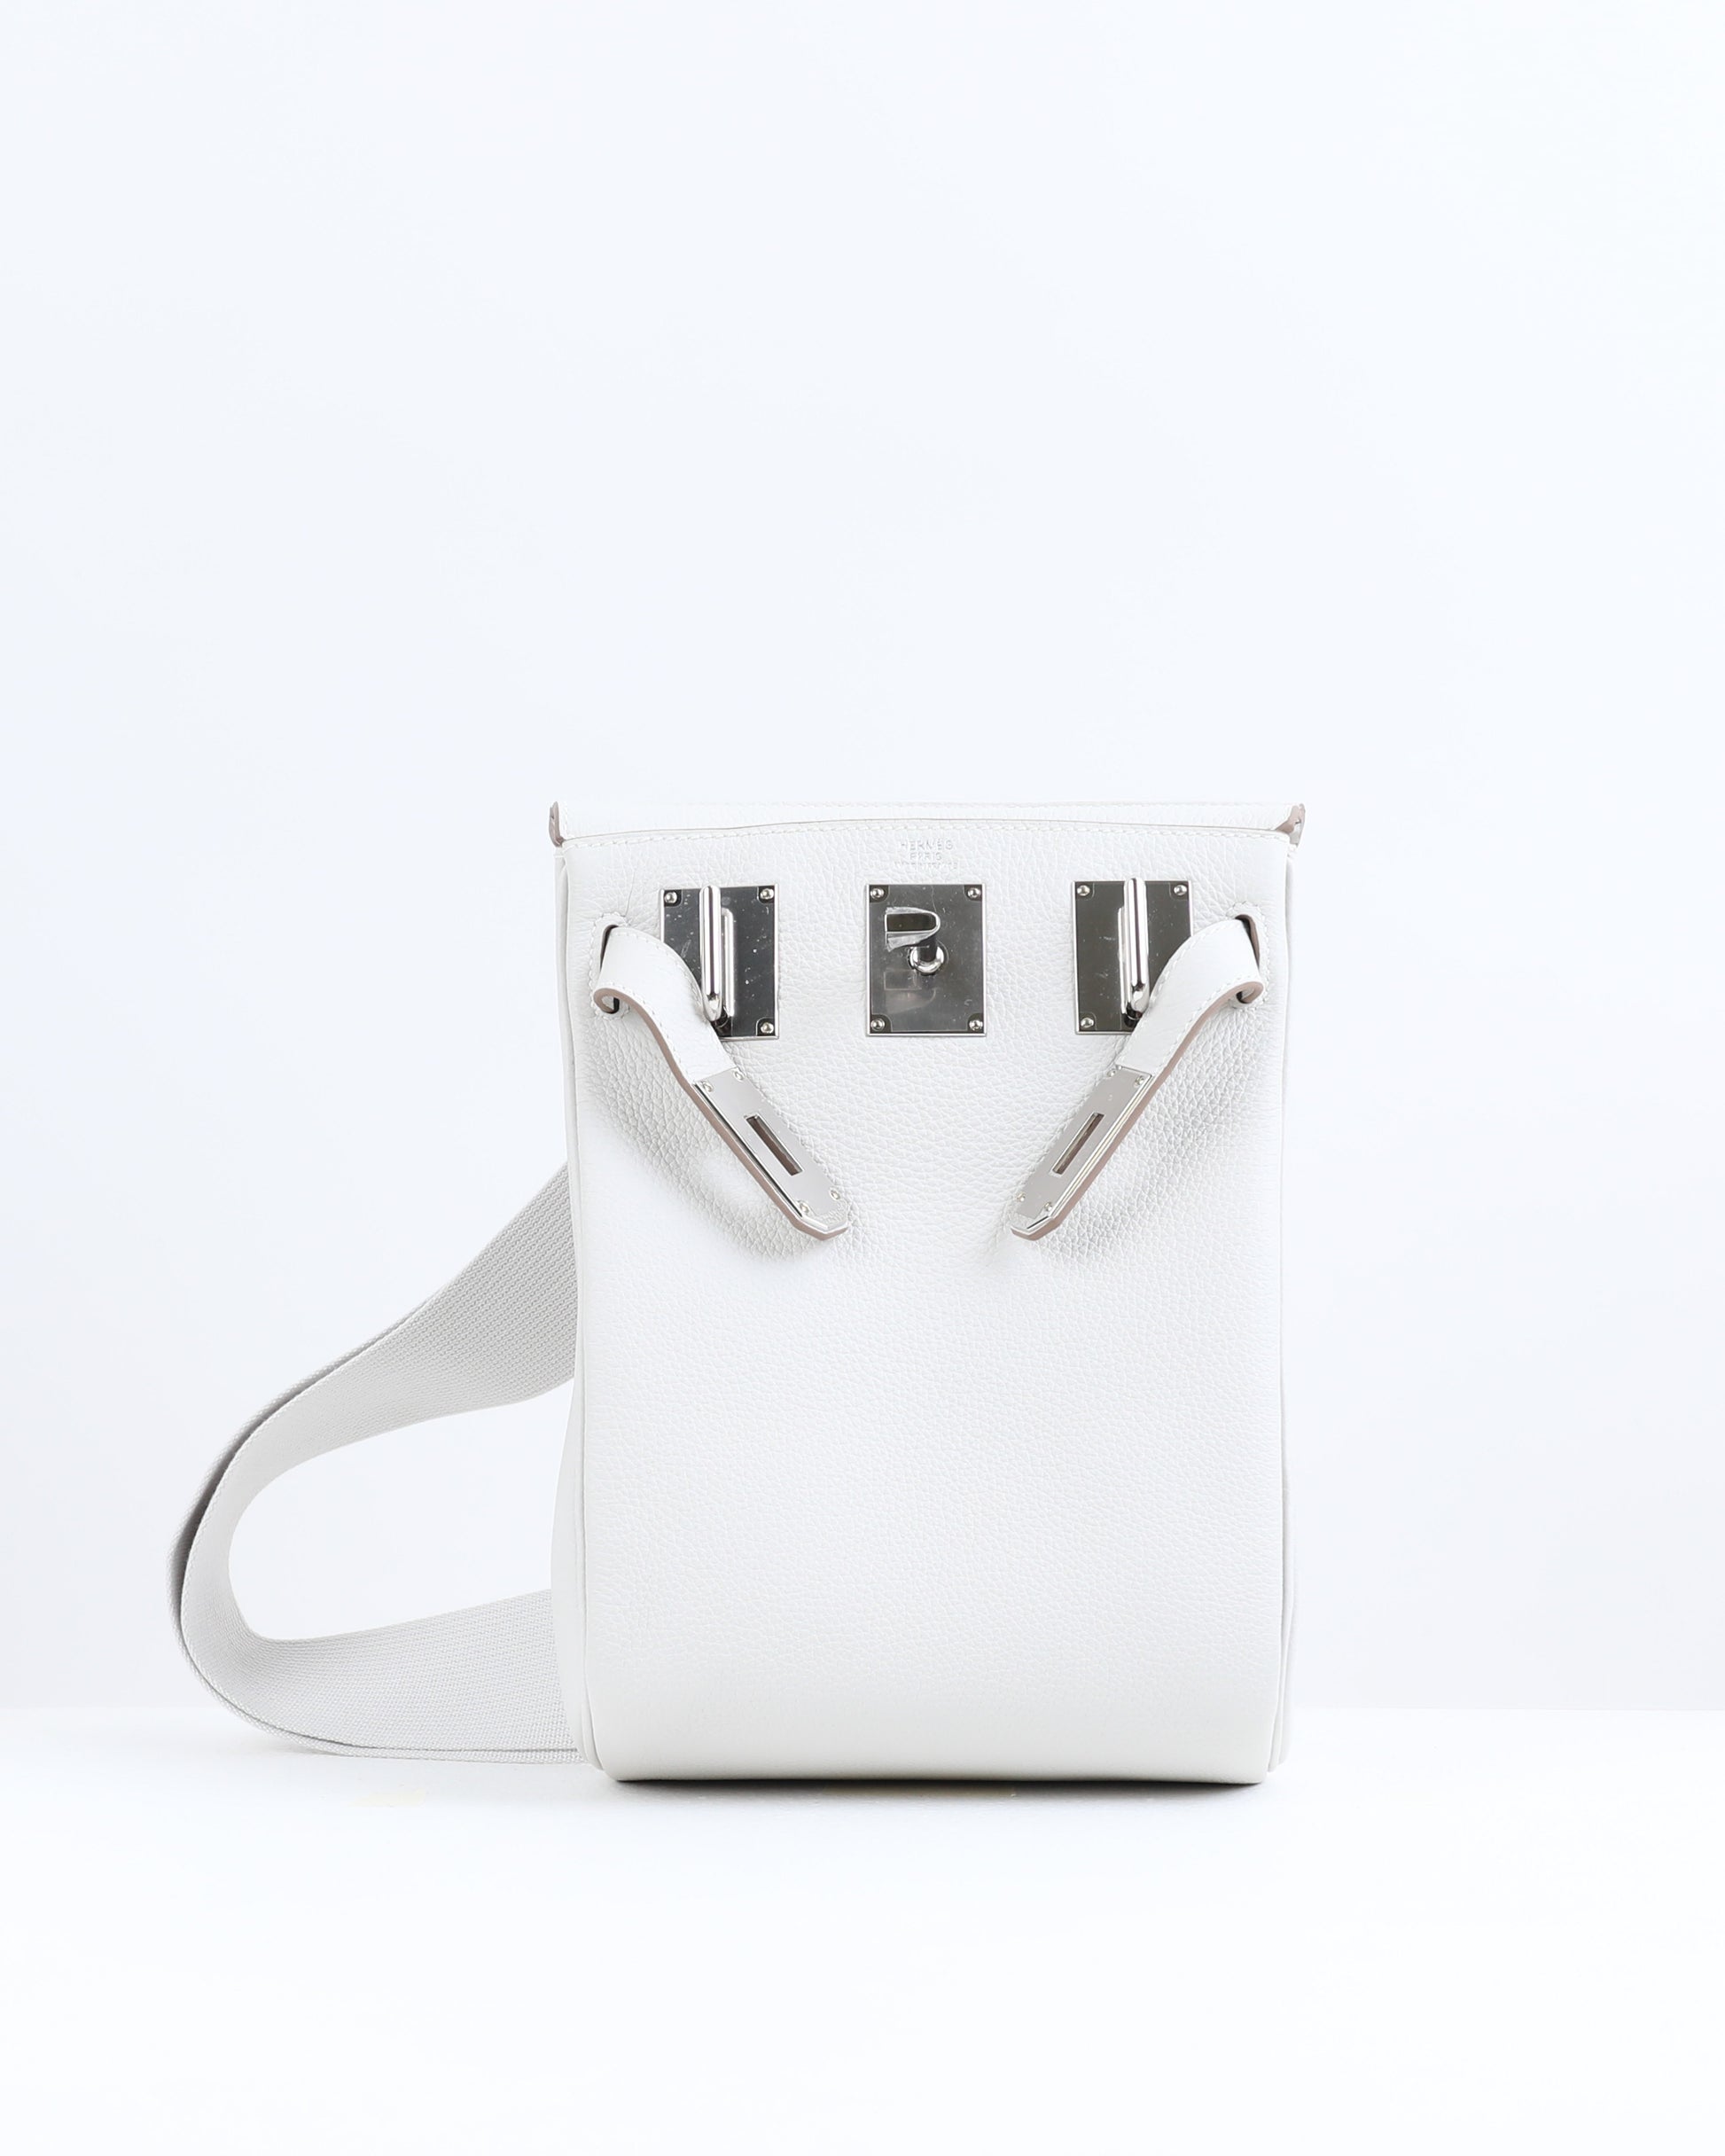 Hermes Hac A Dos GM Backpack Gris Pale Togo Palladium Hardware – Madison  Avenue Couture